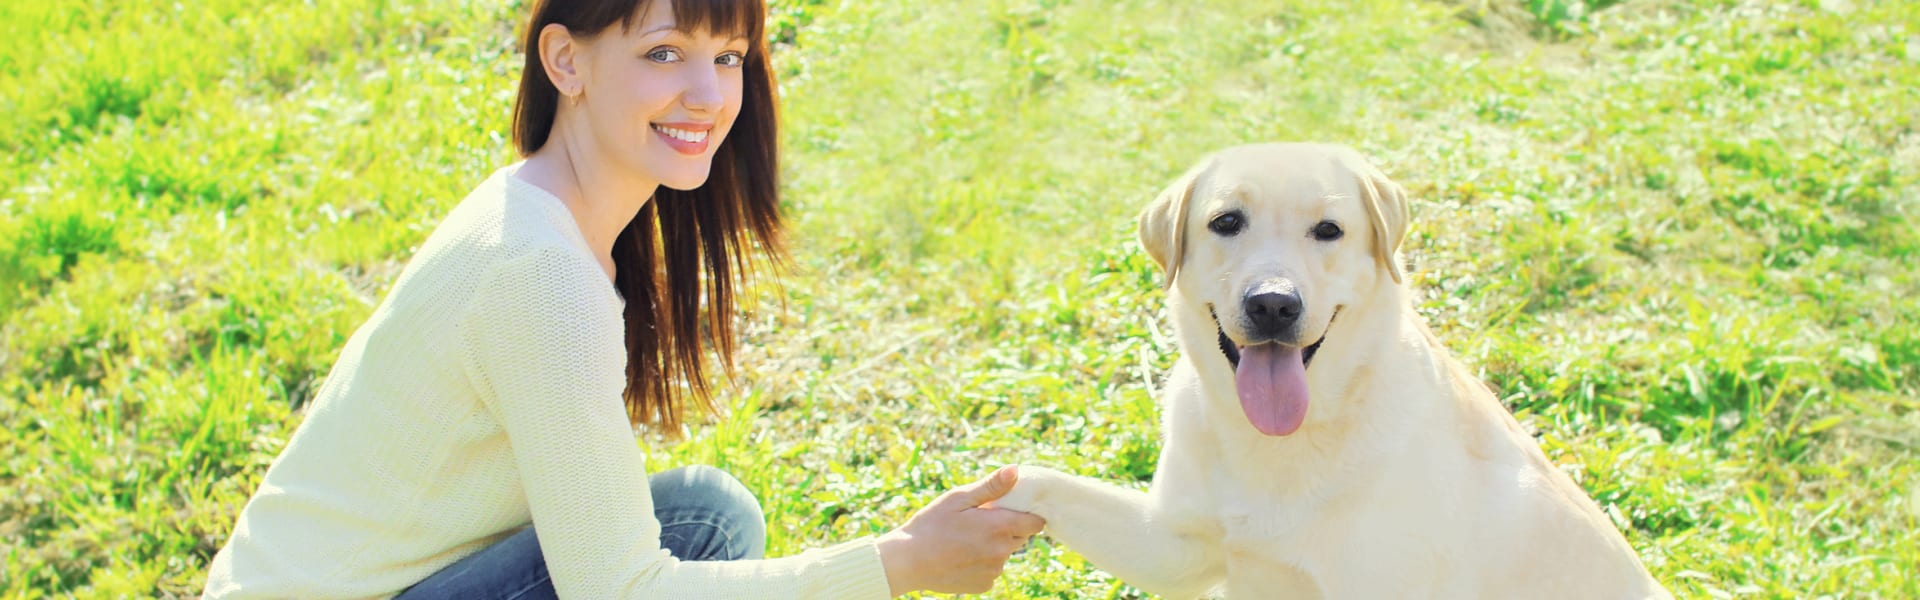 Woman and dog - Positive reinforcement dog training